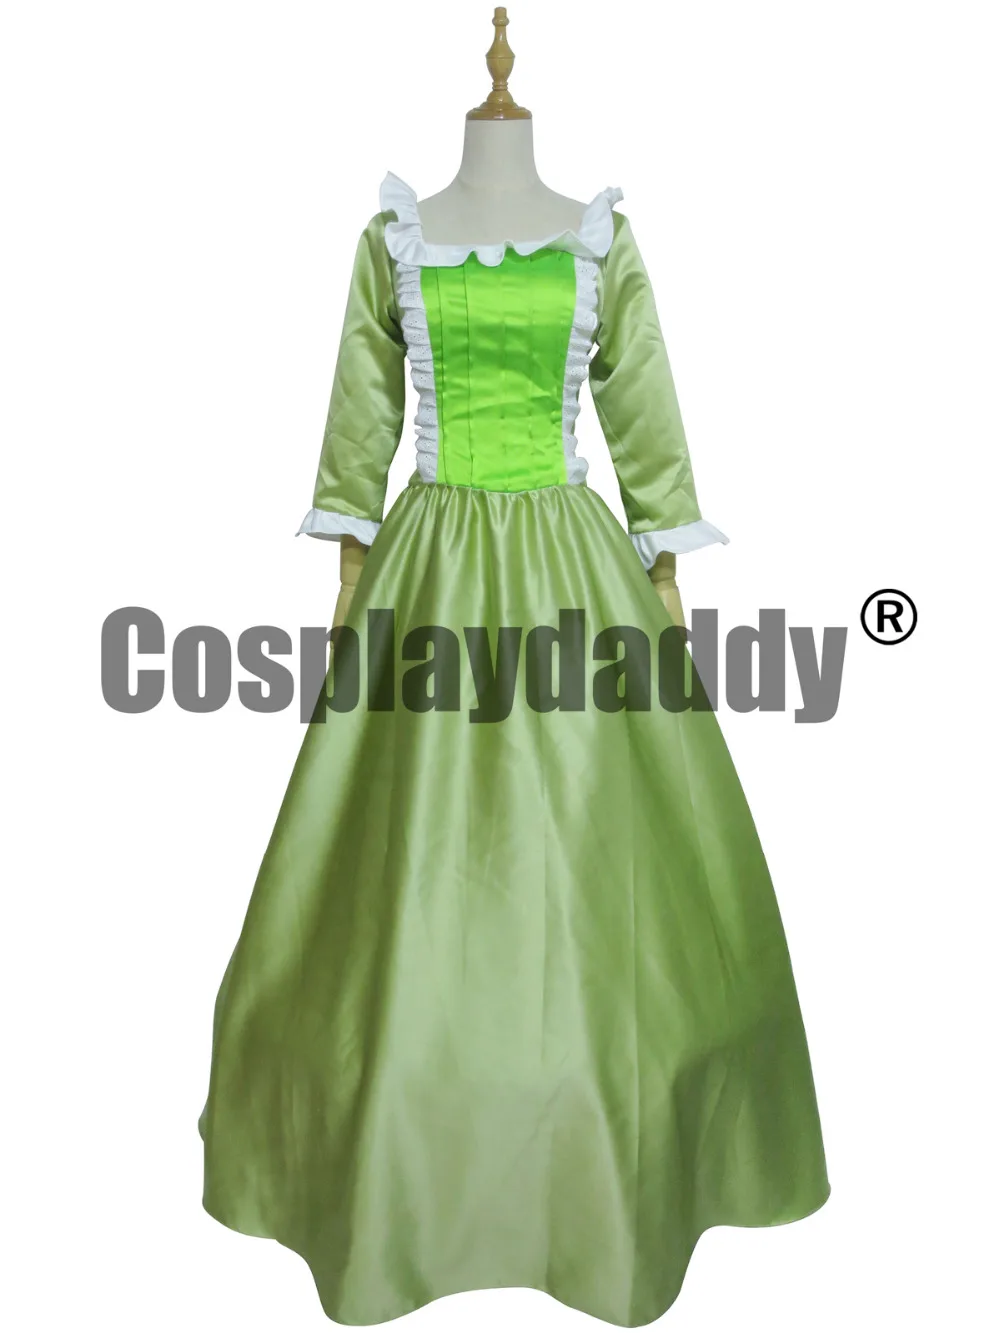 Adult Clothing women dress Sofia the First Amber Dress Princess Cosplay cos...